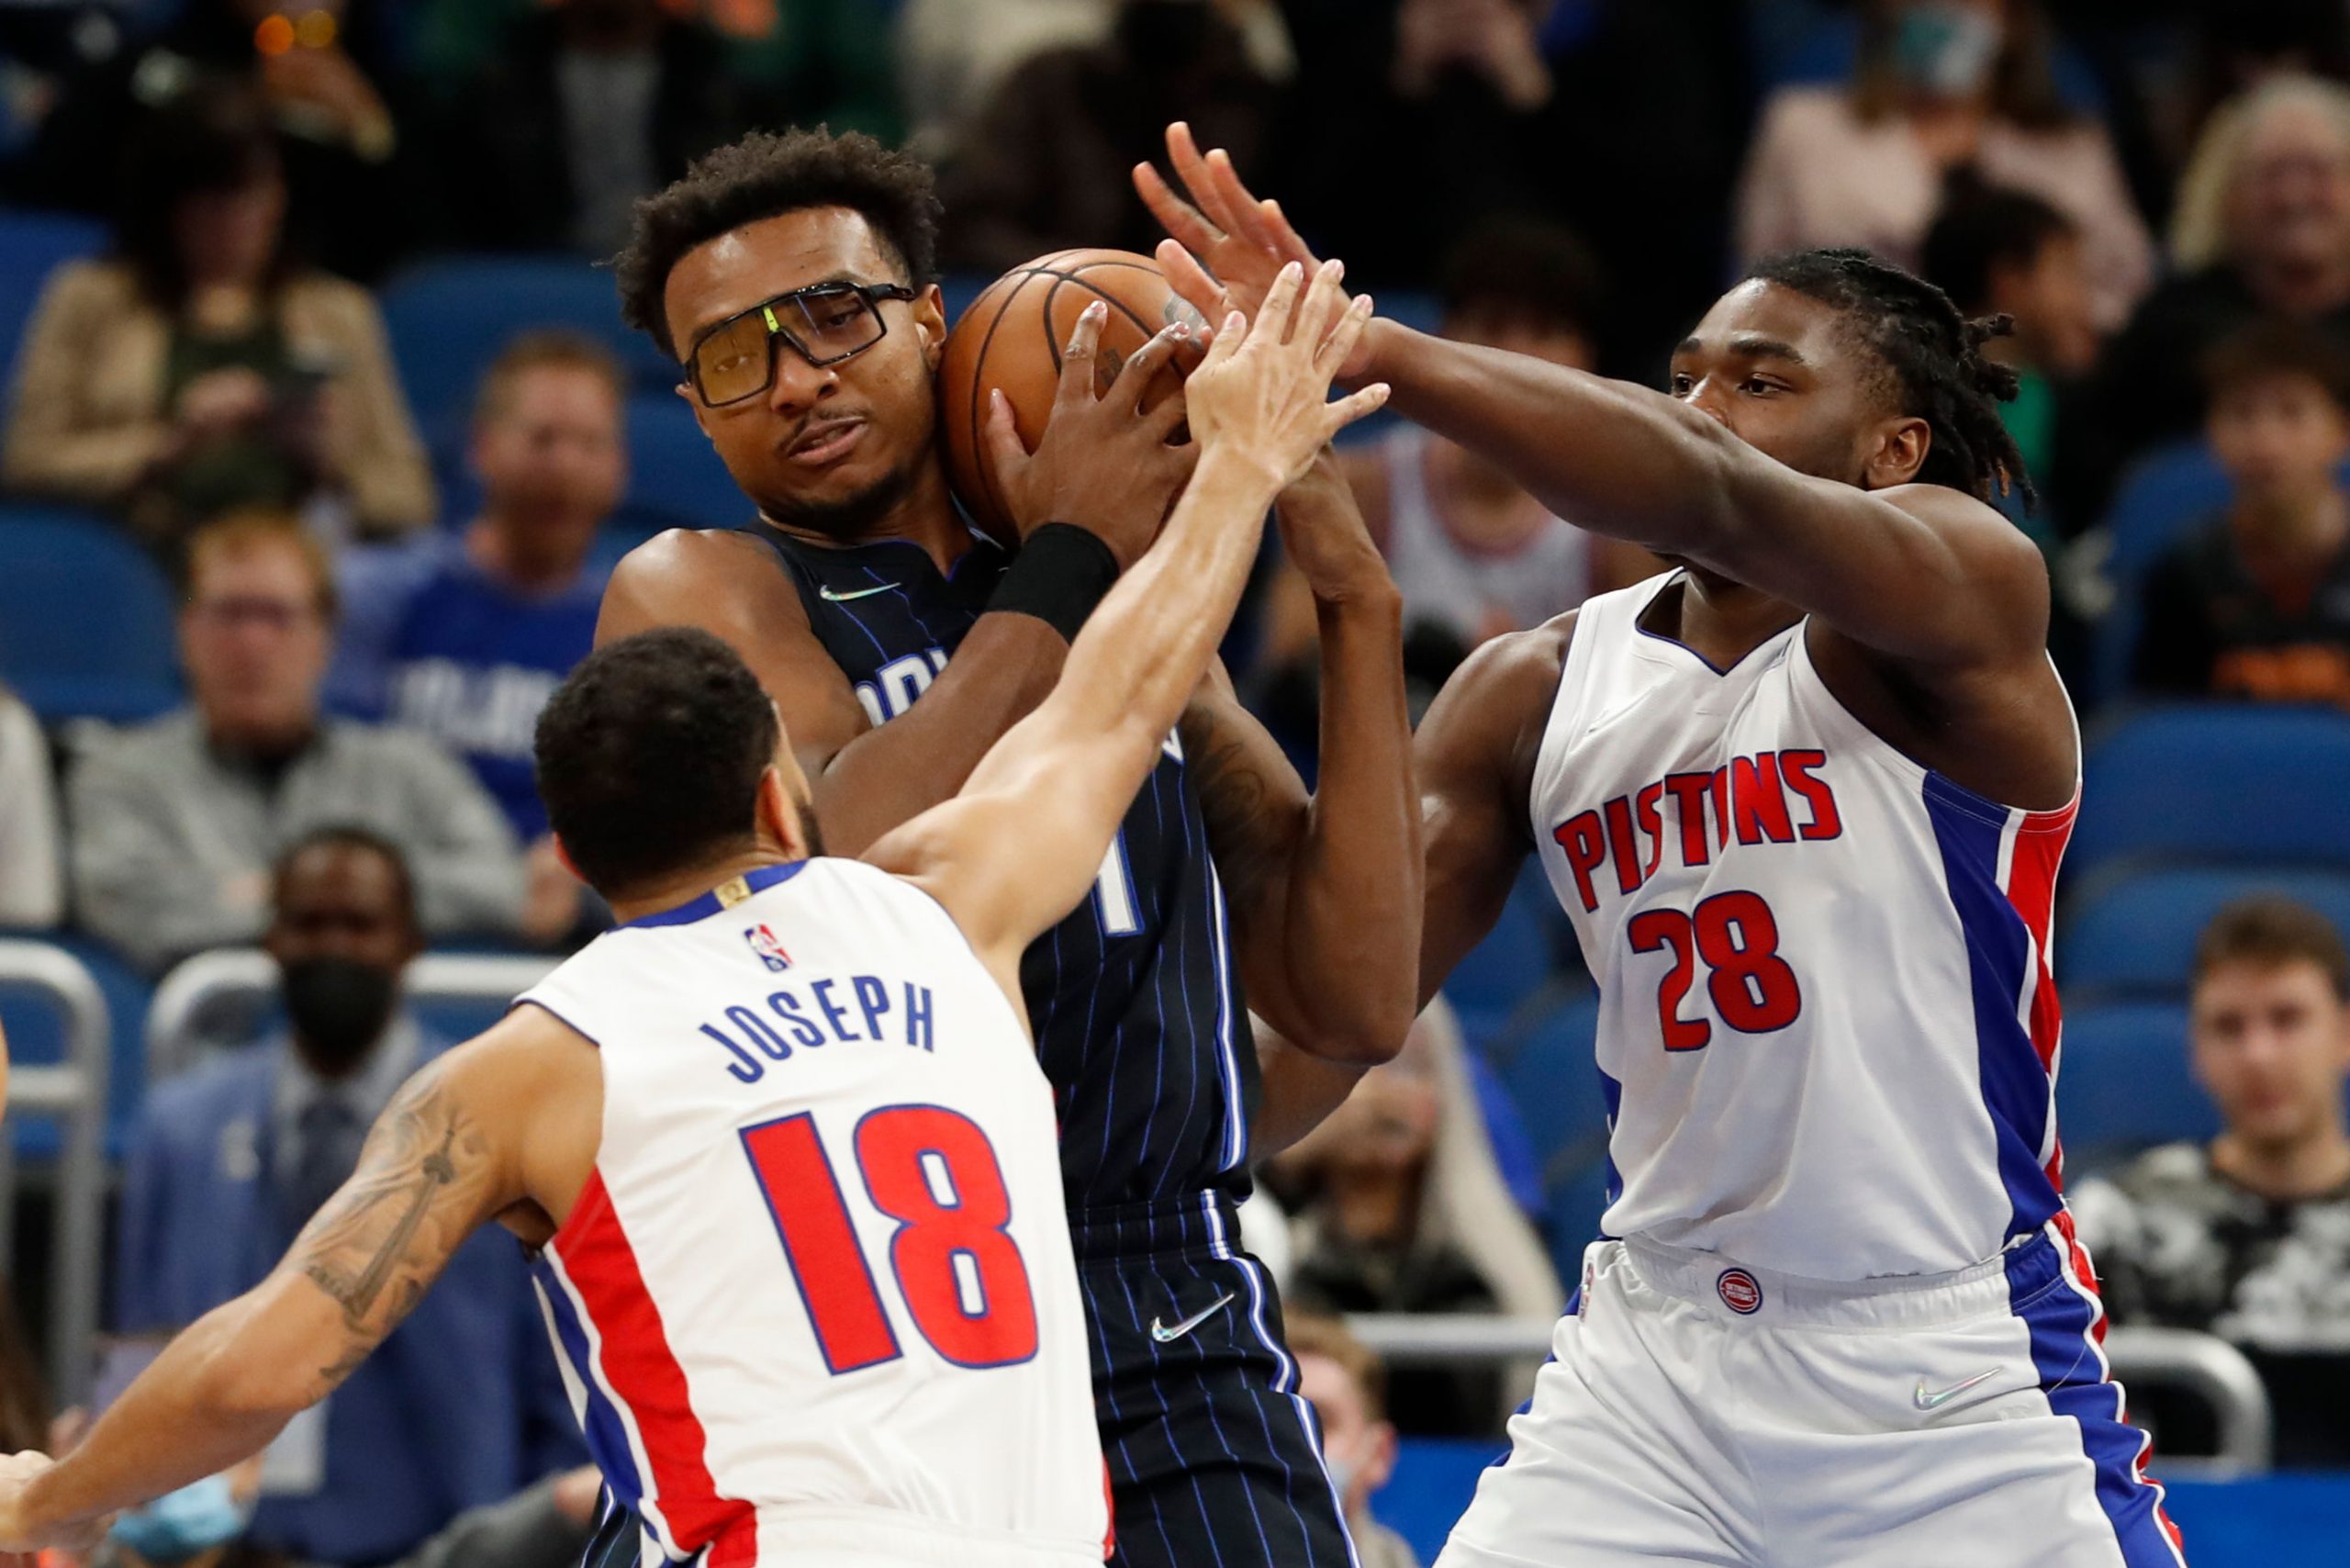 NBA: Wagner outplays Cunningham, lifts Magic past Pistons in 119-103 win